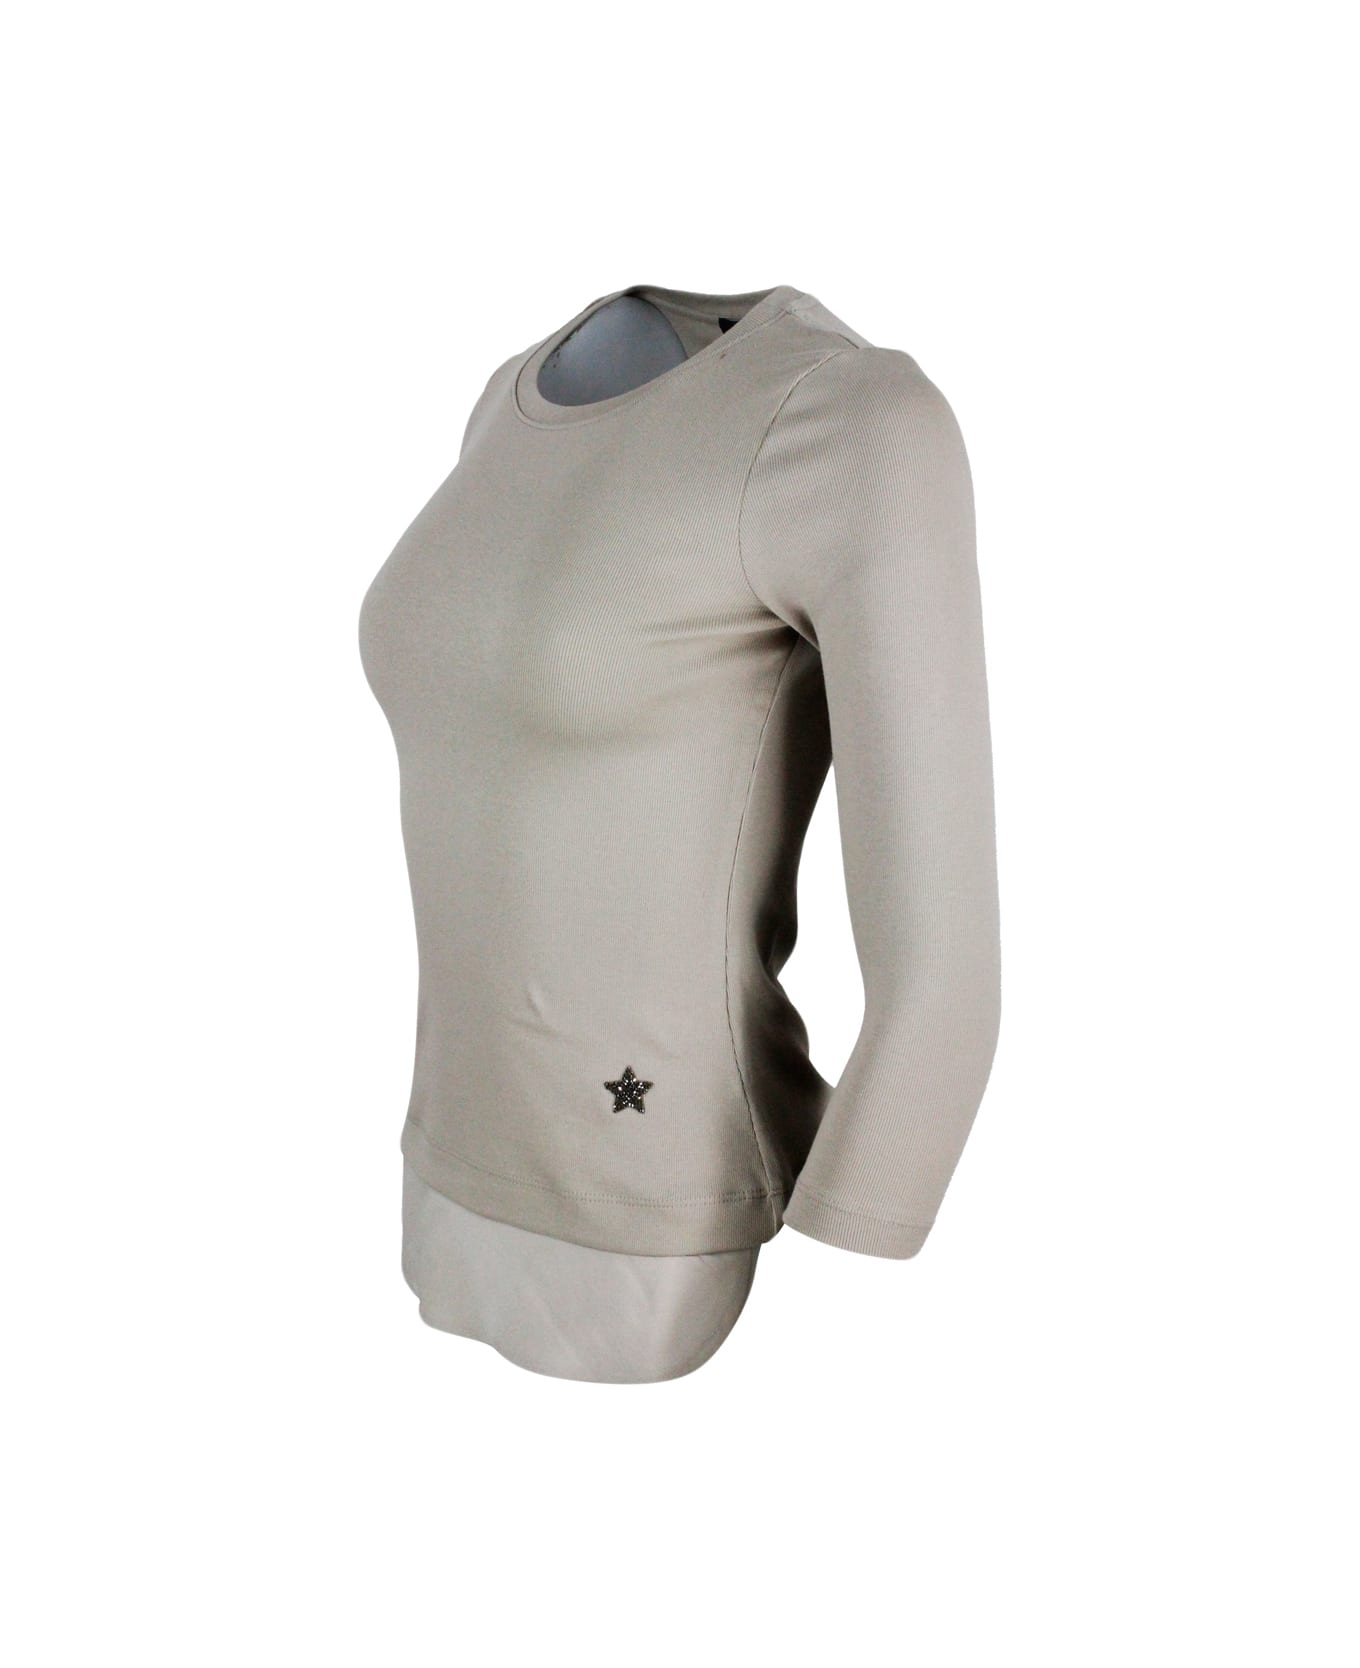 Lorena Antoniazzi Ribbed Crew-neck Short-sleeved Cotton T-shirt With Swarosky Star And Silk Insert On The Bottom - Beige